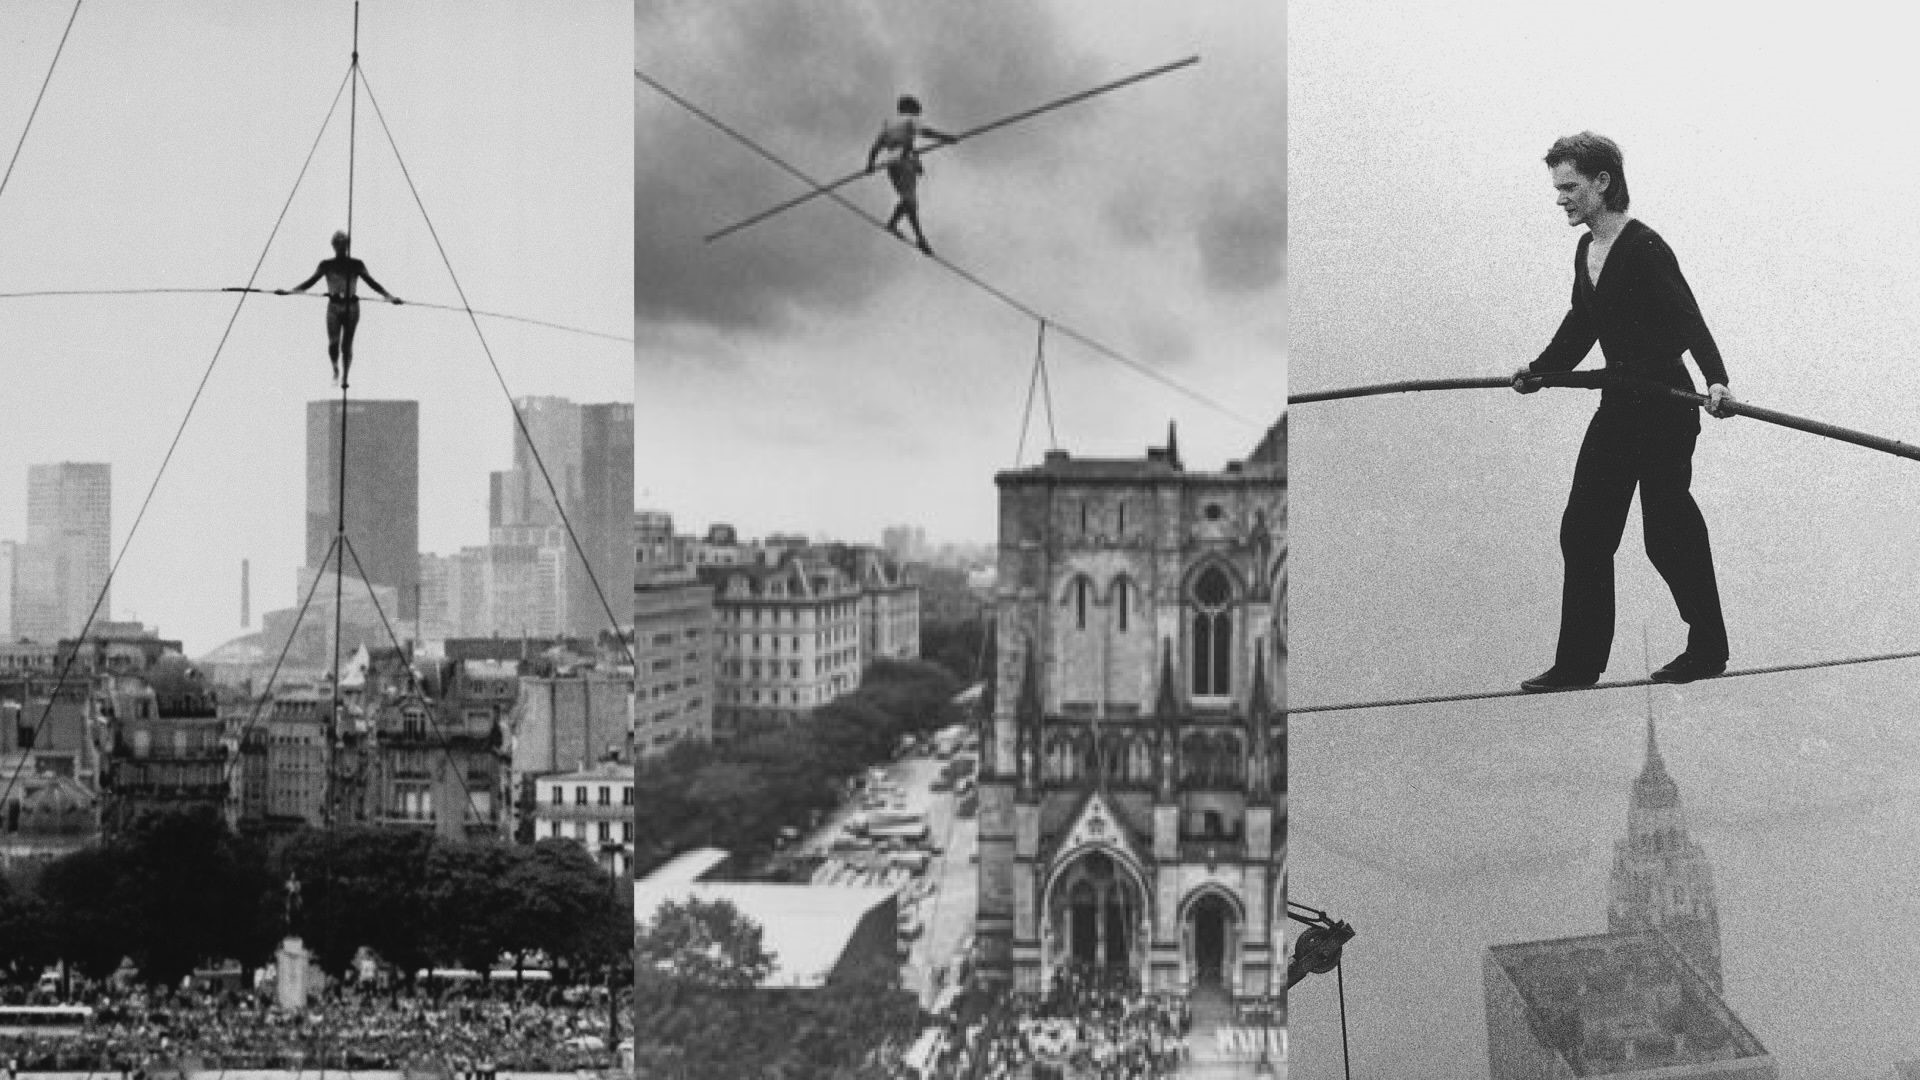 The French high wire artist best known for walking between the Twin Towers of the World Trade Center in 1974 is heading to Washington, D.C.